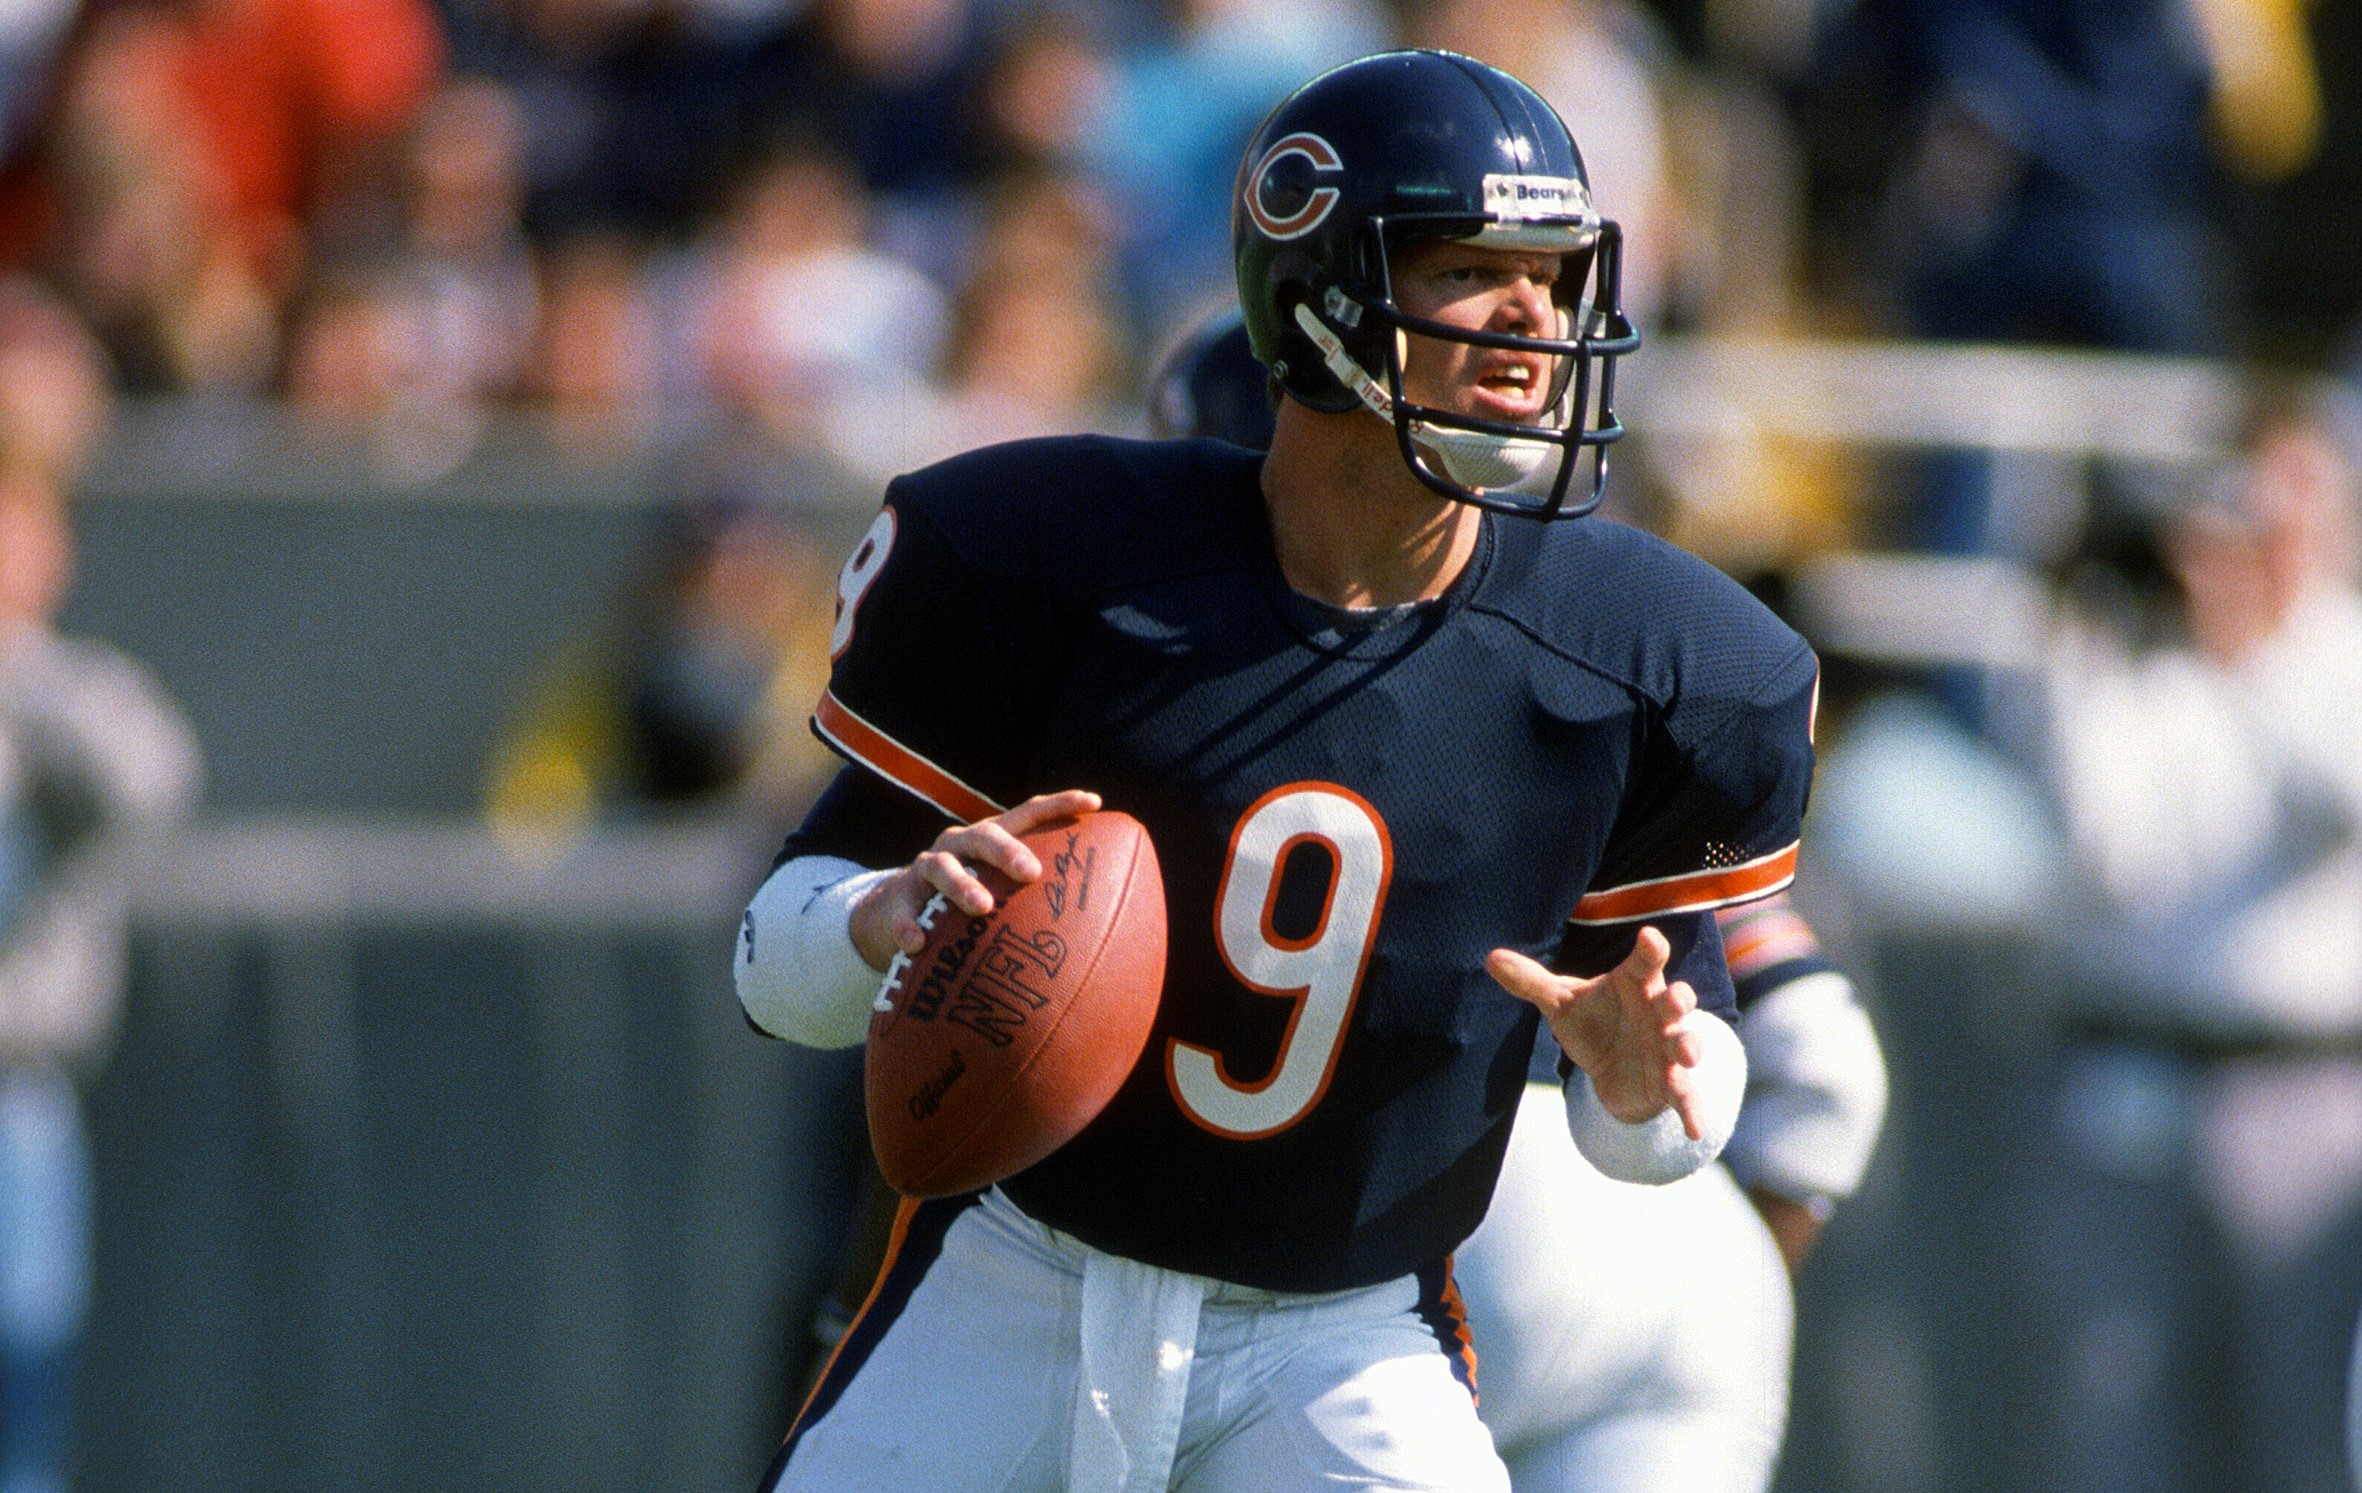 Jim McMahon of the Chicago Bears drops back to pass.